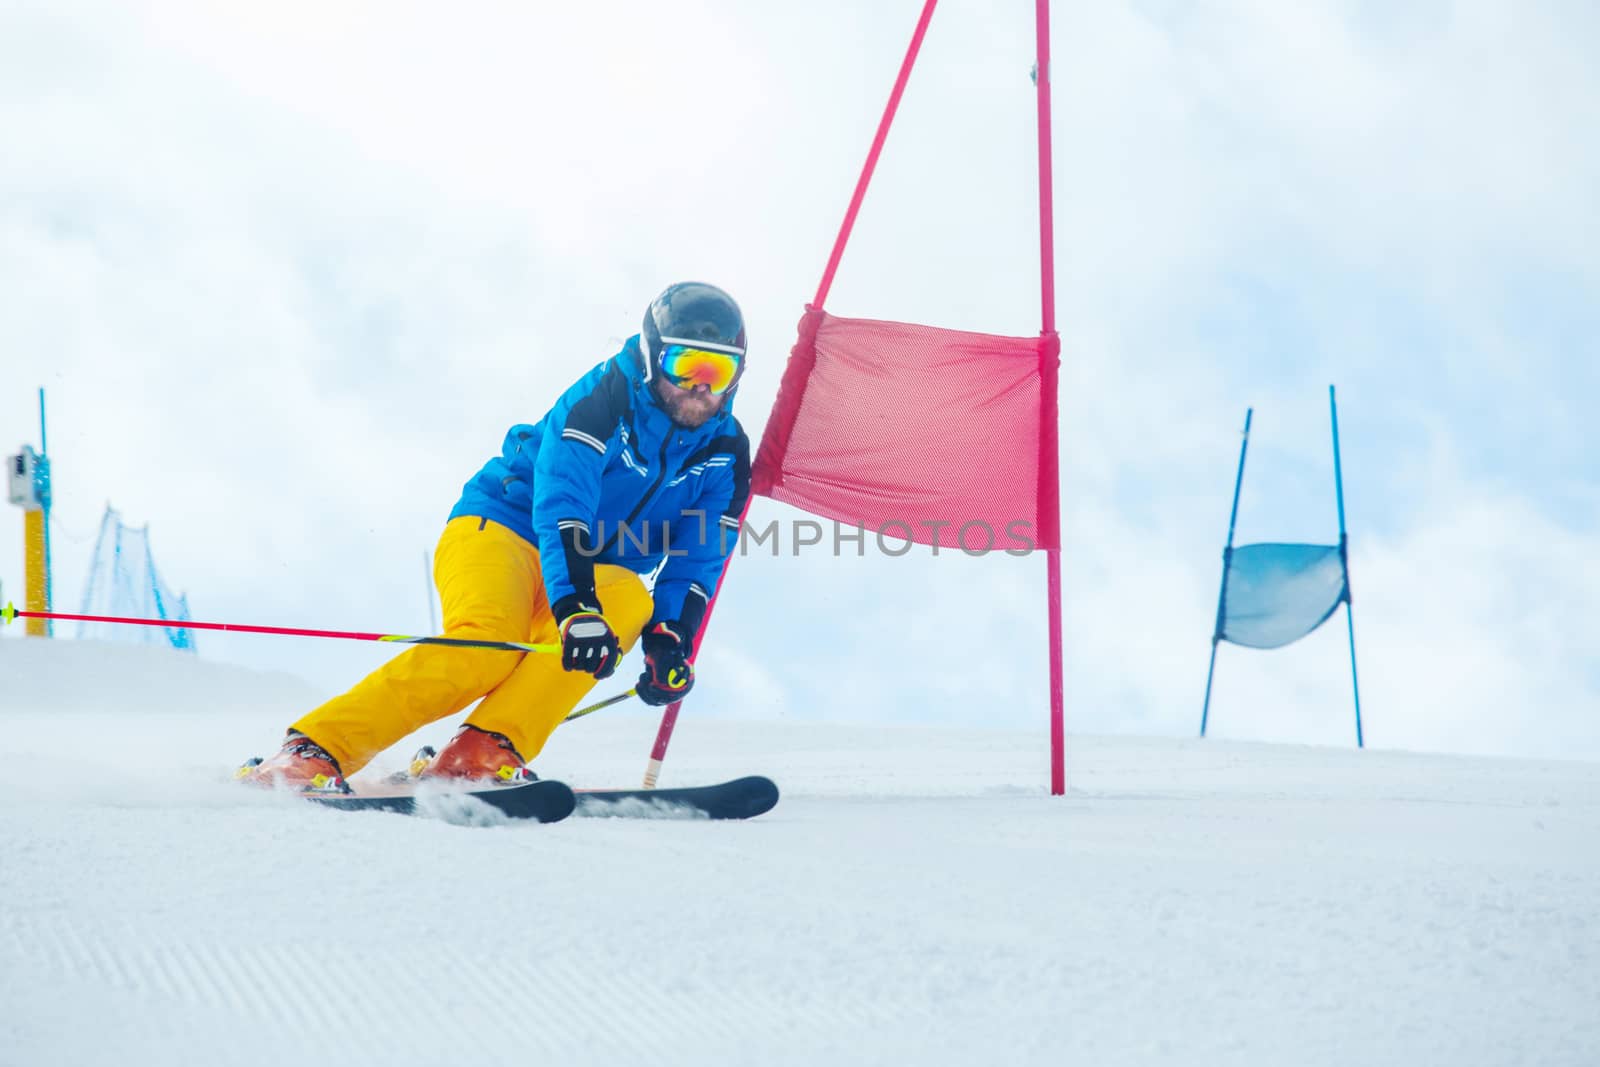 Gs Giant Slalom alpine ski racer skiing down the slope with gates sport winter training at Col Gallina Cortina d'Ampezzo Dolomites